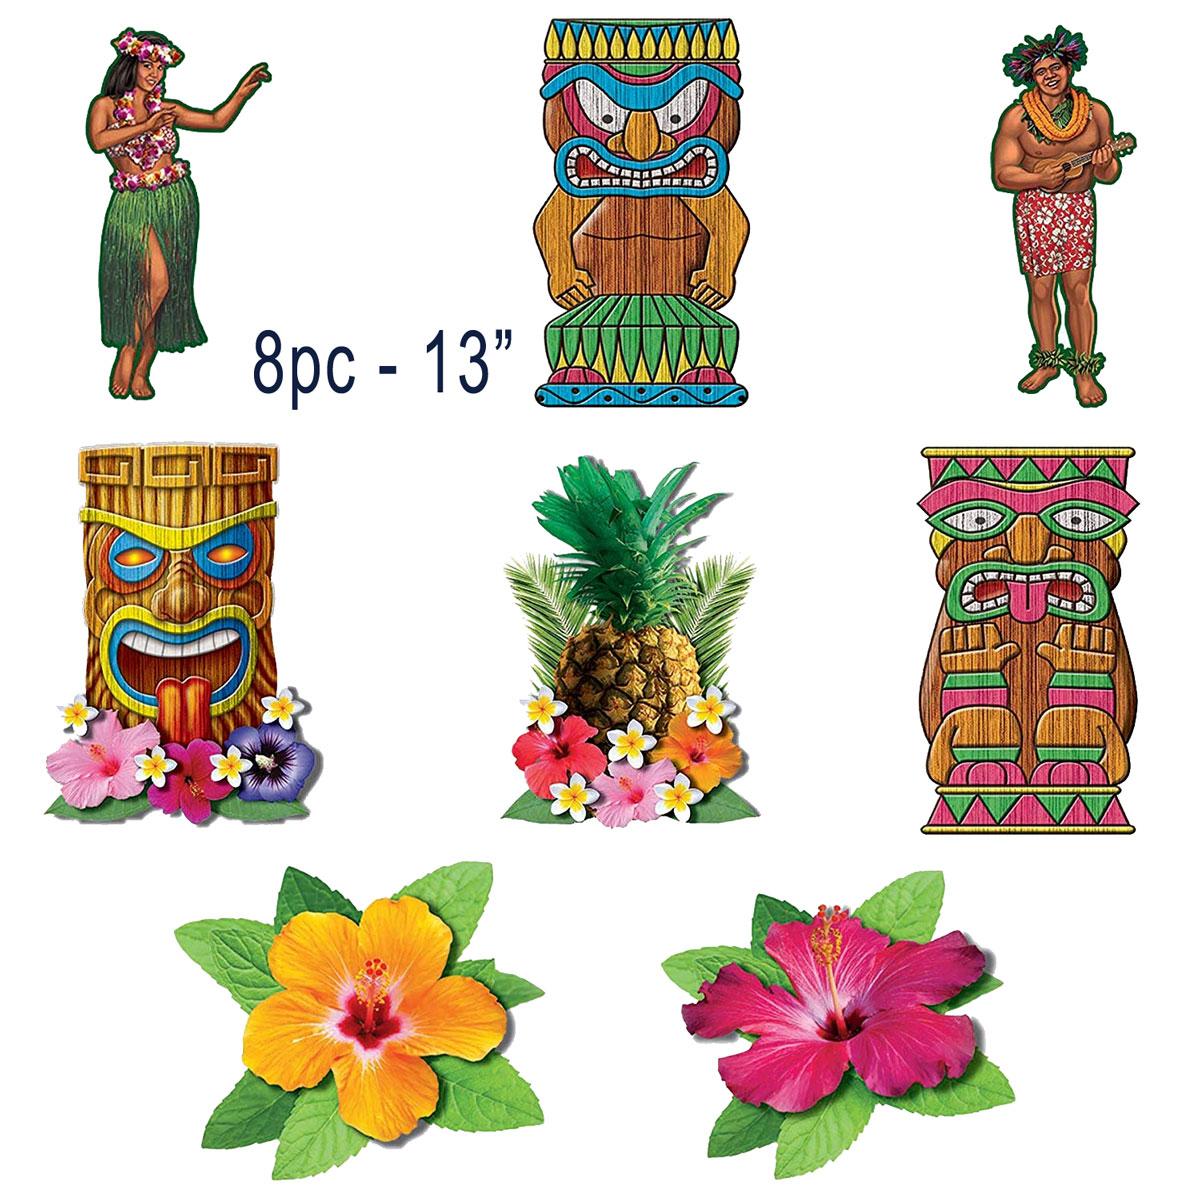 Hawaiian Cutout Decorations Pk8 each approx 13" by Forum Novelties 80128 available here at Karnival Costumes online party shop